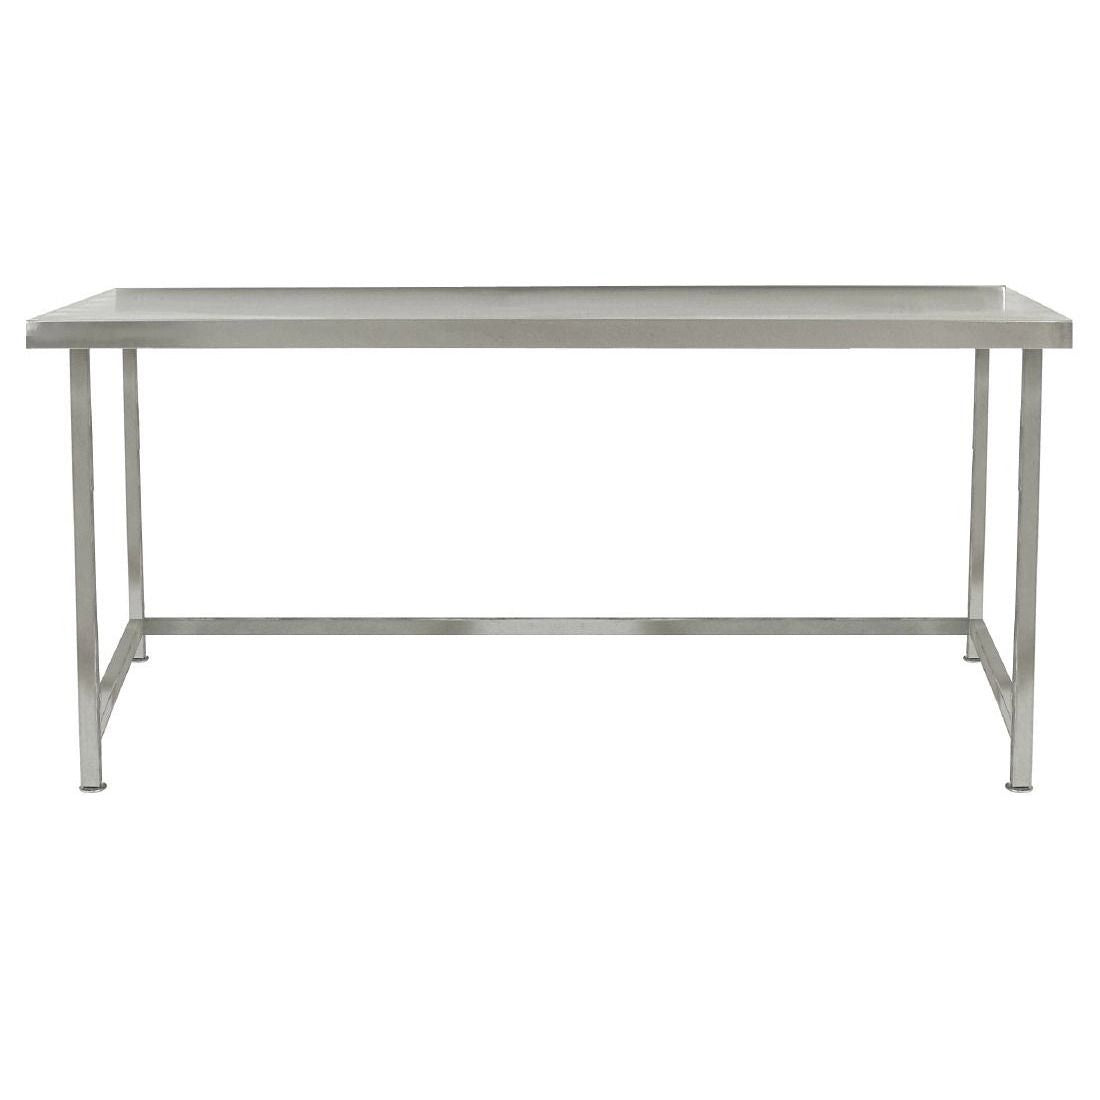 Parry Fully Welded Stainless Steel Centre Table 900x600mm - DC618